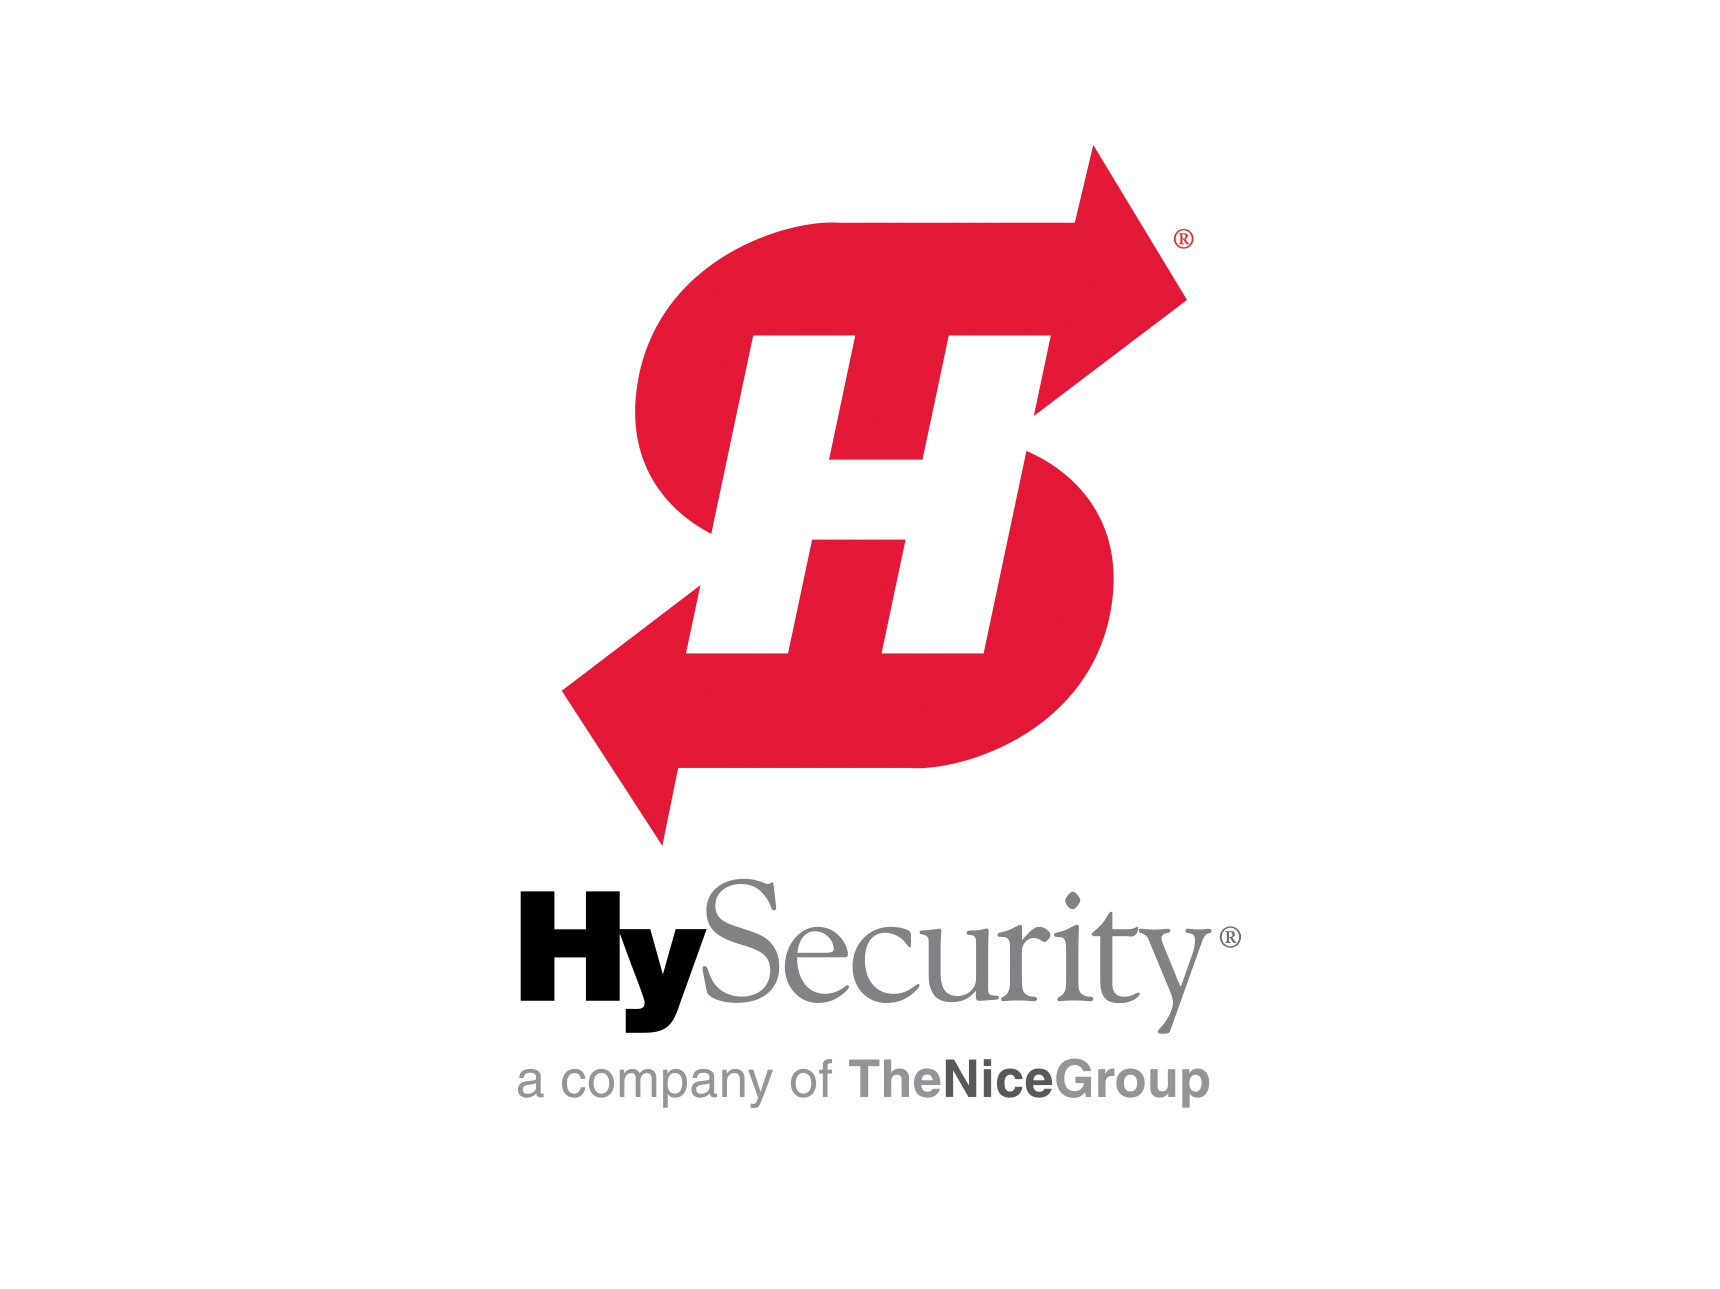 HySecurityNice_logo_vertical.png